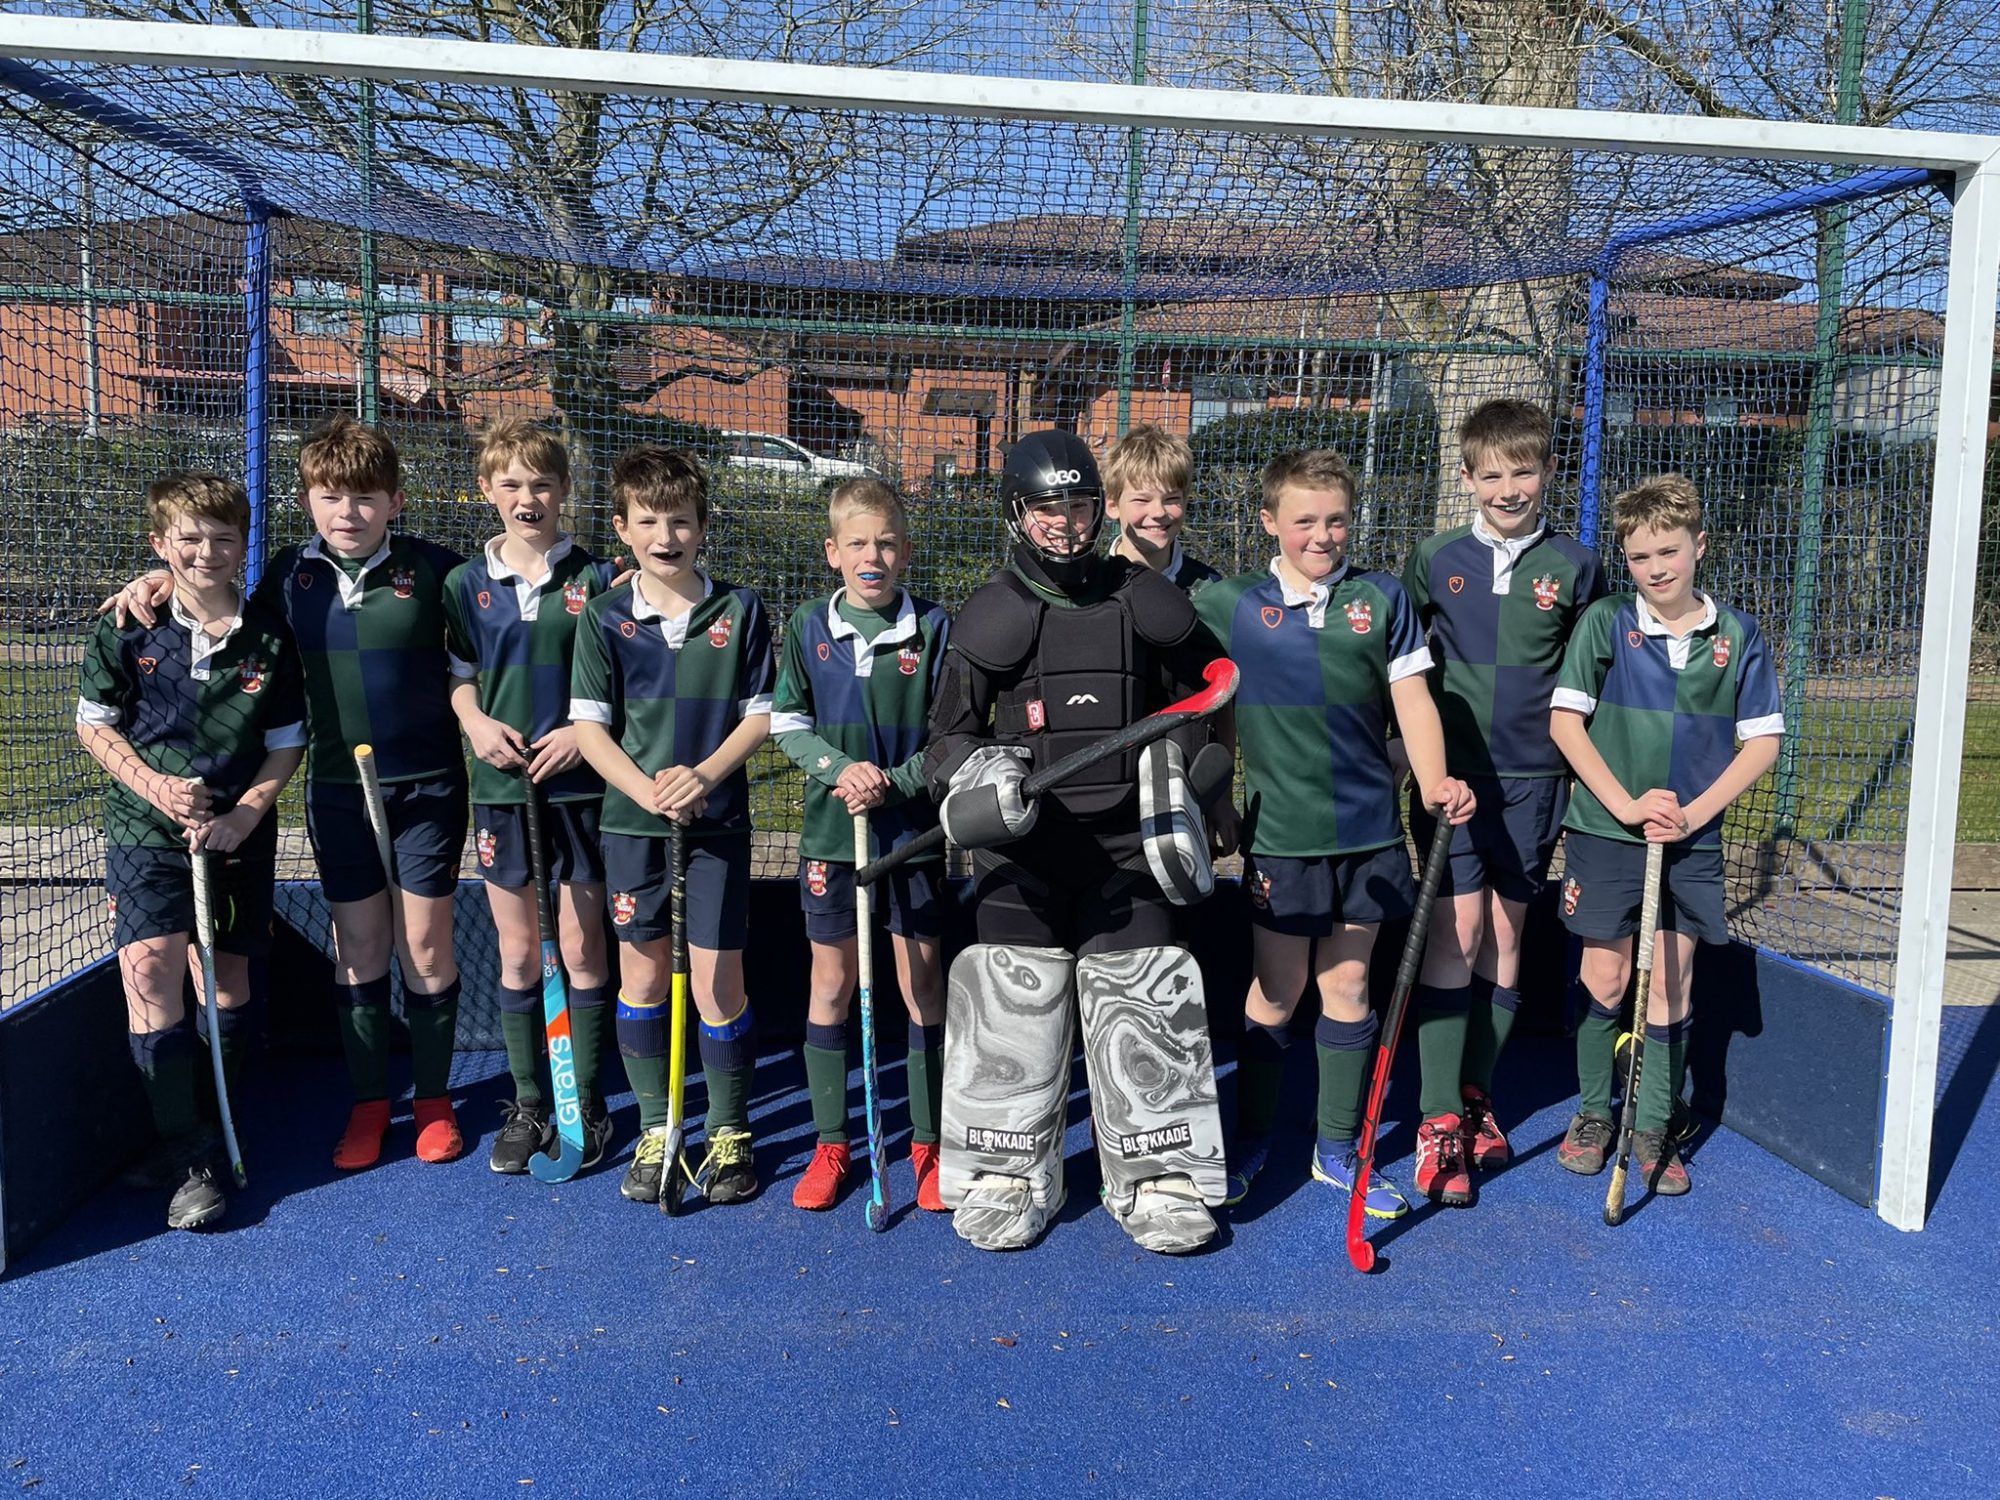 Back of the net - Boys Hockey at RGS Worcester